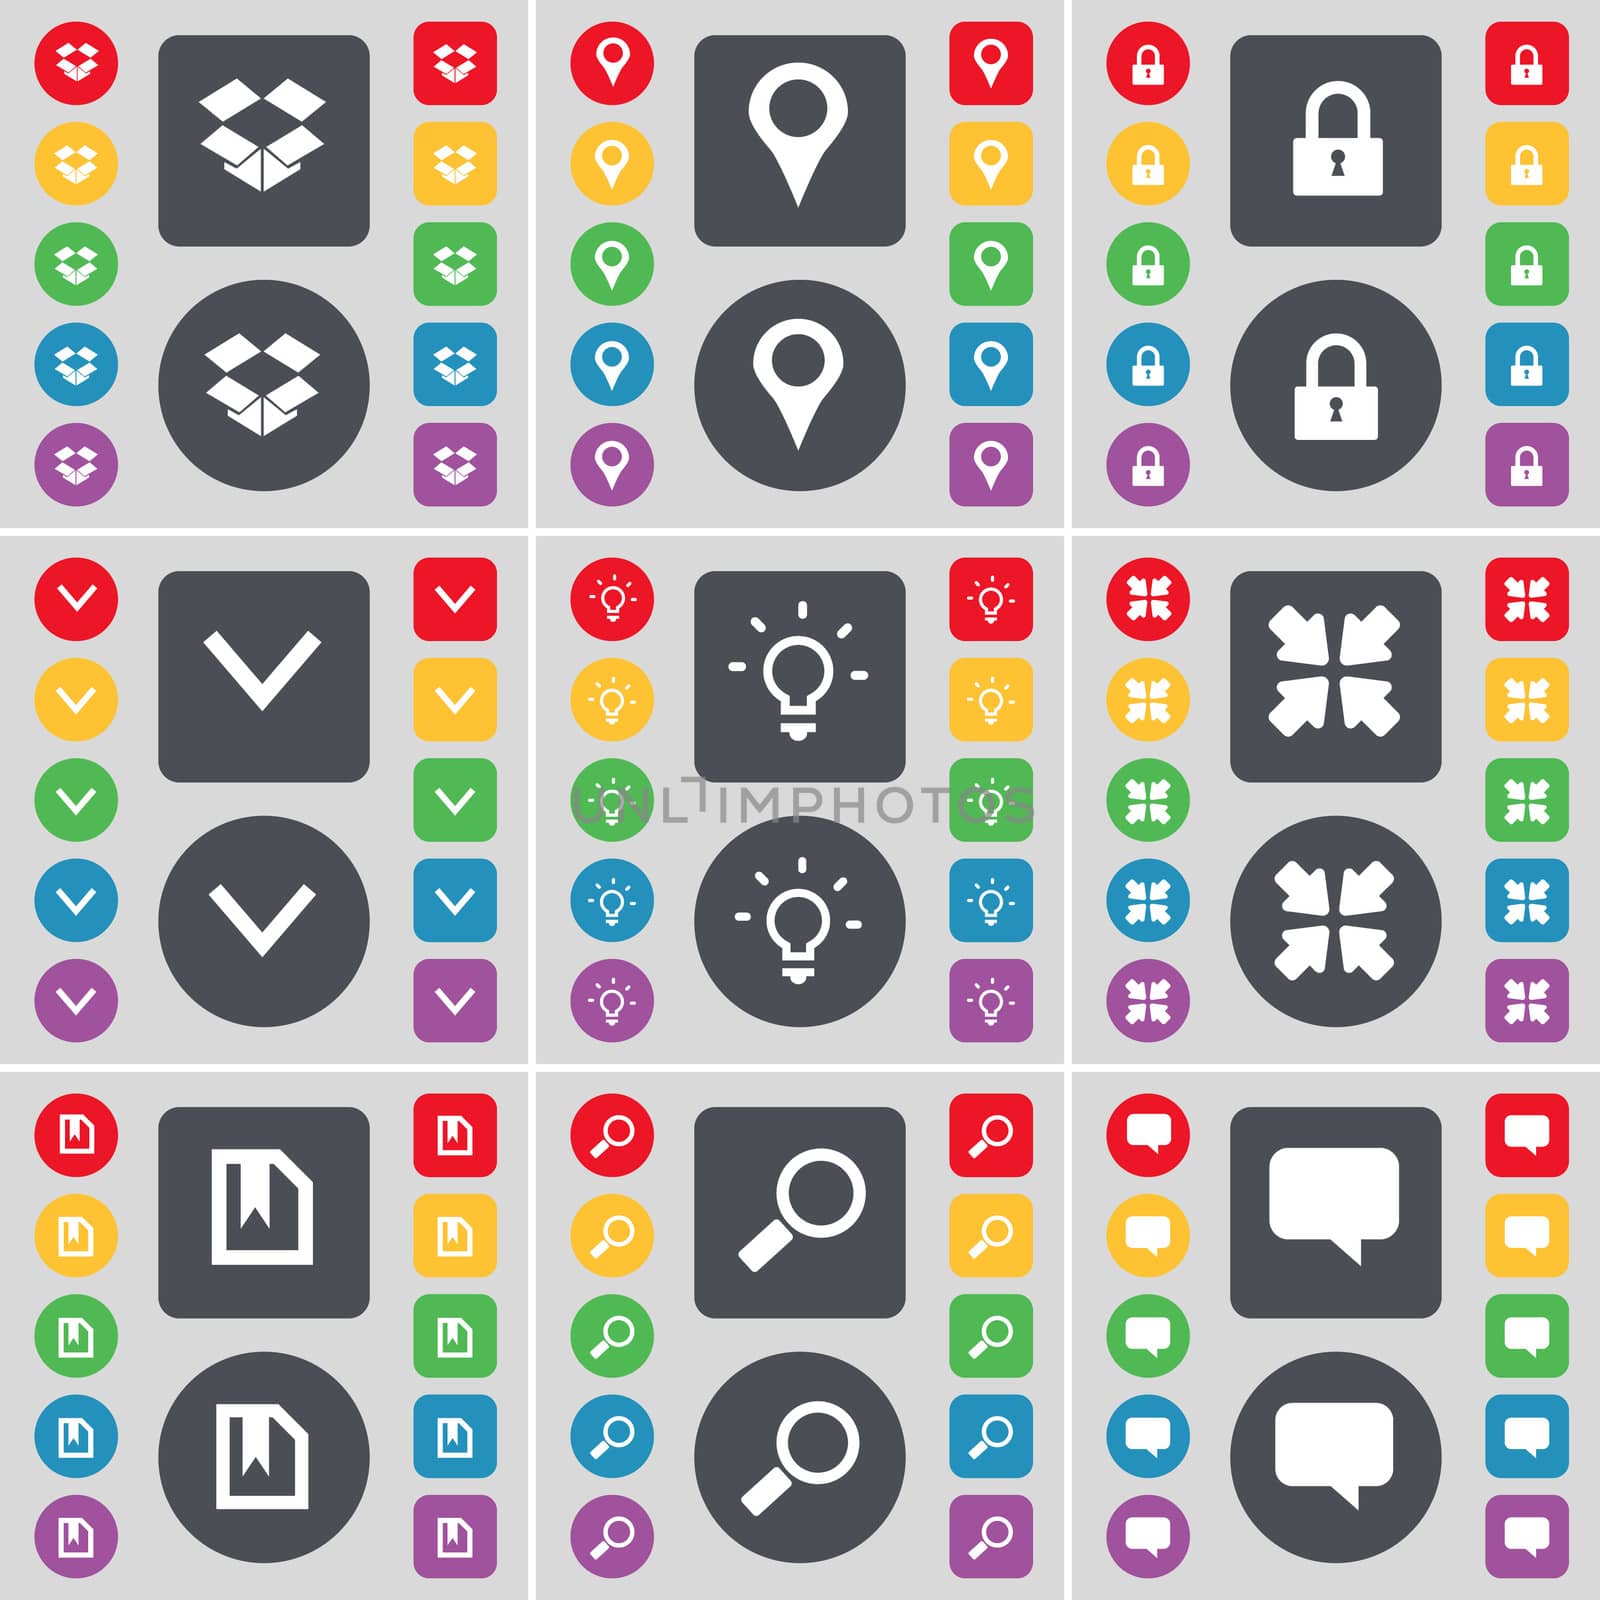 Dropbox, Checkpoint, Lock, Arrow down, Light bulb, Deploying screen, File, Magnifying glass, Chat bubble icon symbol. A large set of flat, colored buttons for your design. illustration